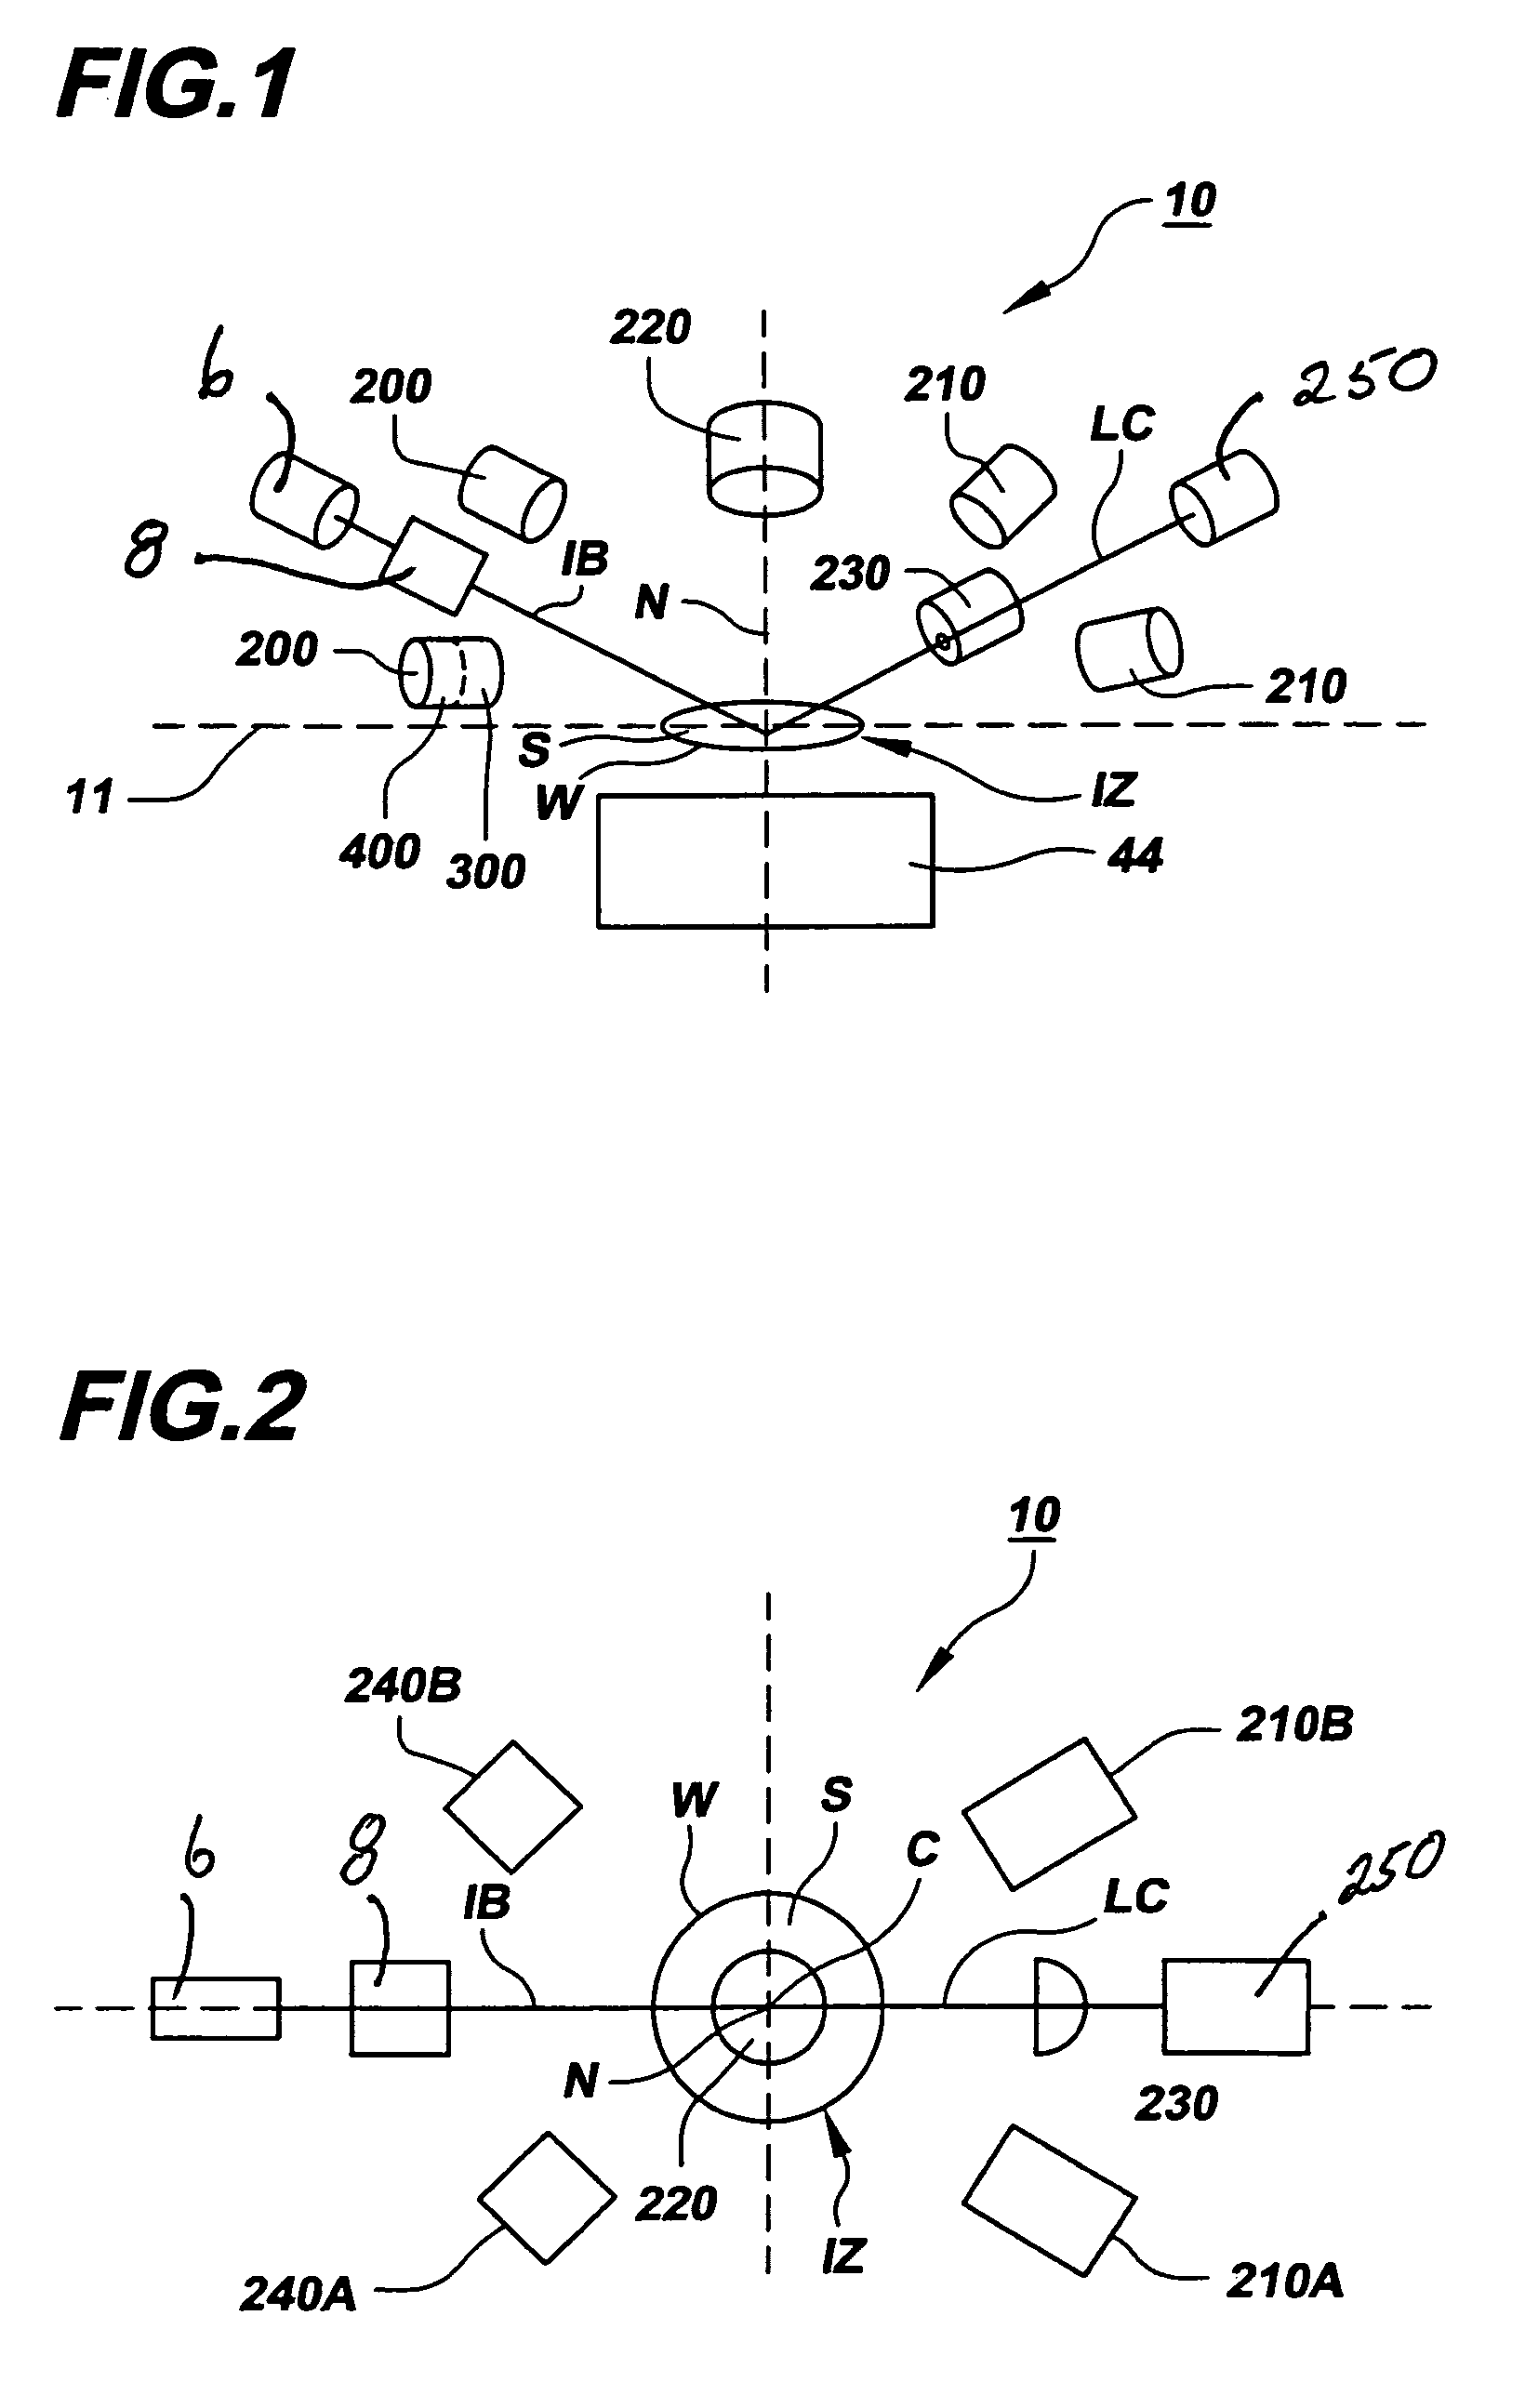 Threshold determination in an inspection system